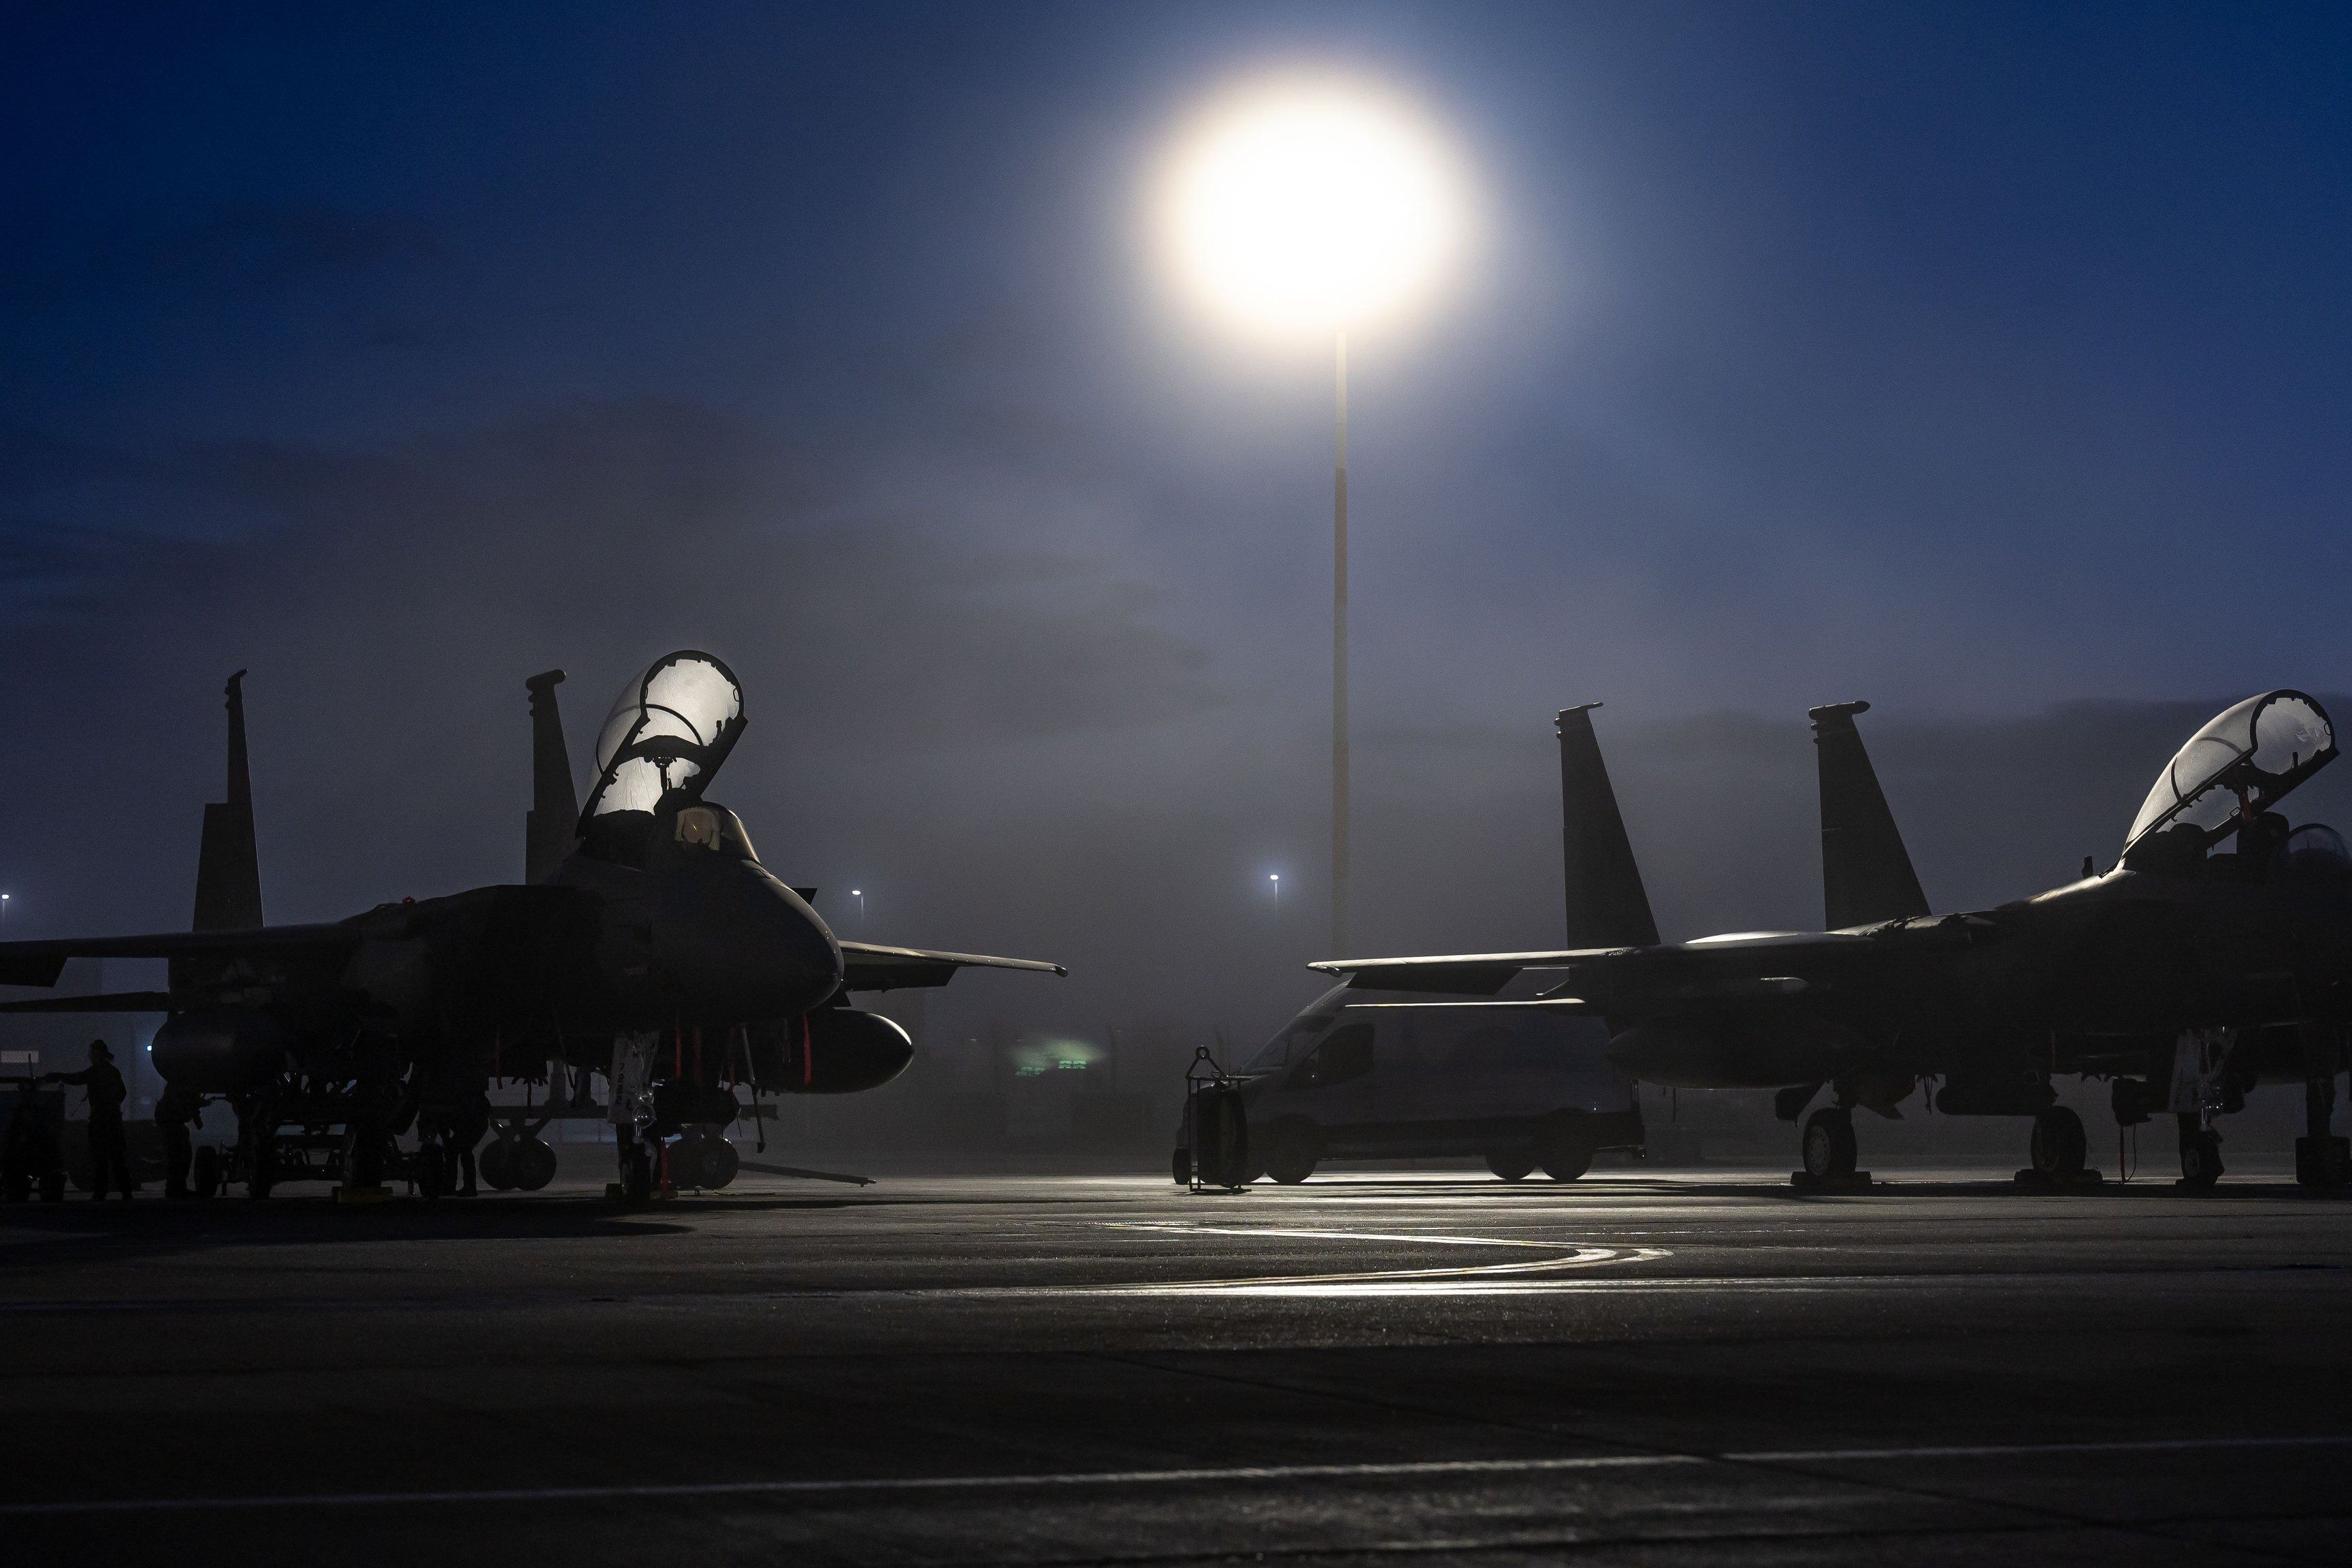 US F-15s parked at night